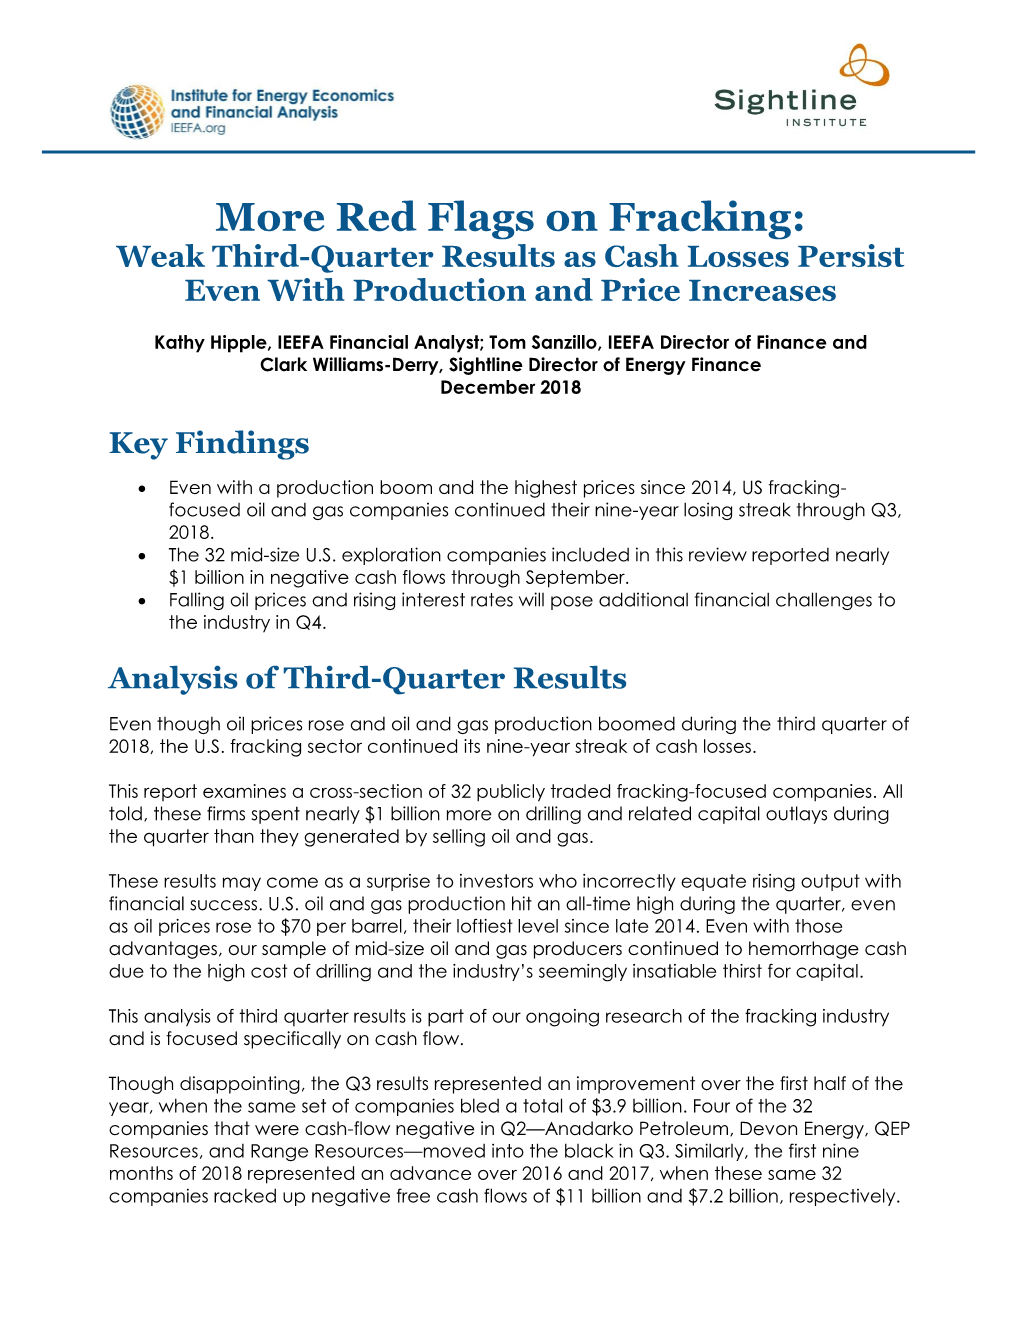 IEEFA: More Red Flags on Fracking: Weak Third-Quarter Results